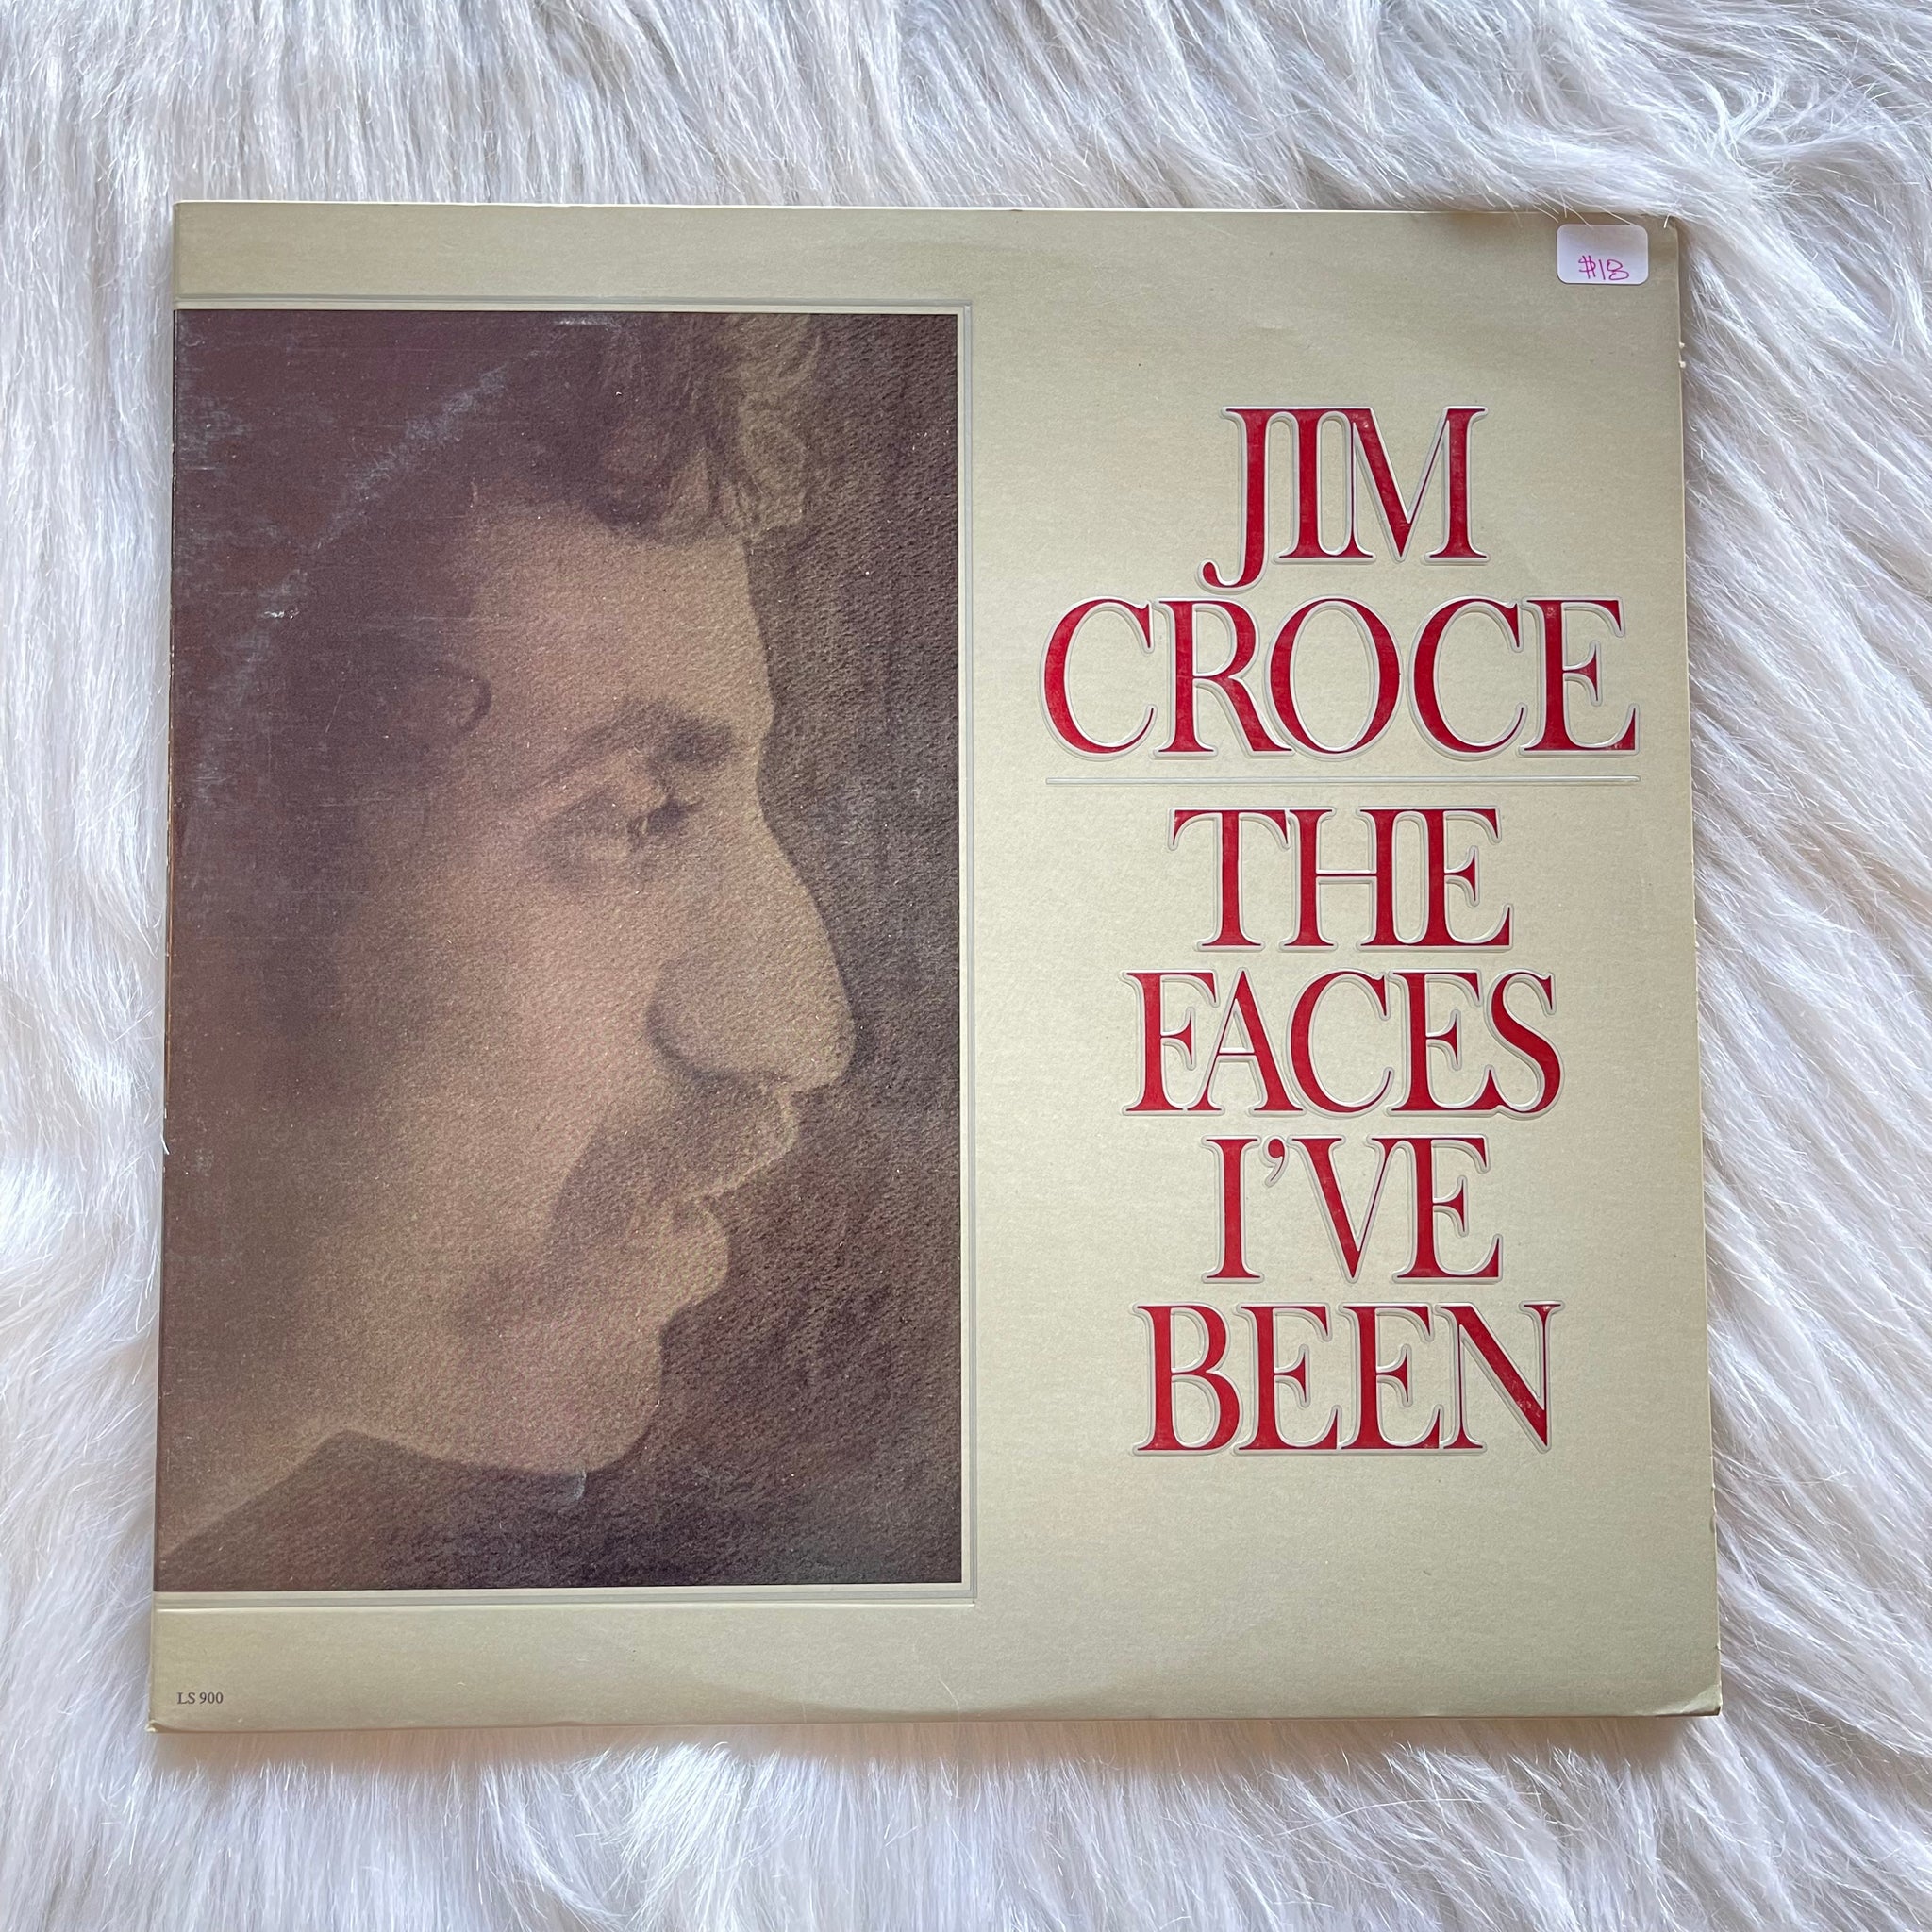 Croce Jim-The Faces I’ve Been